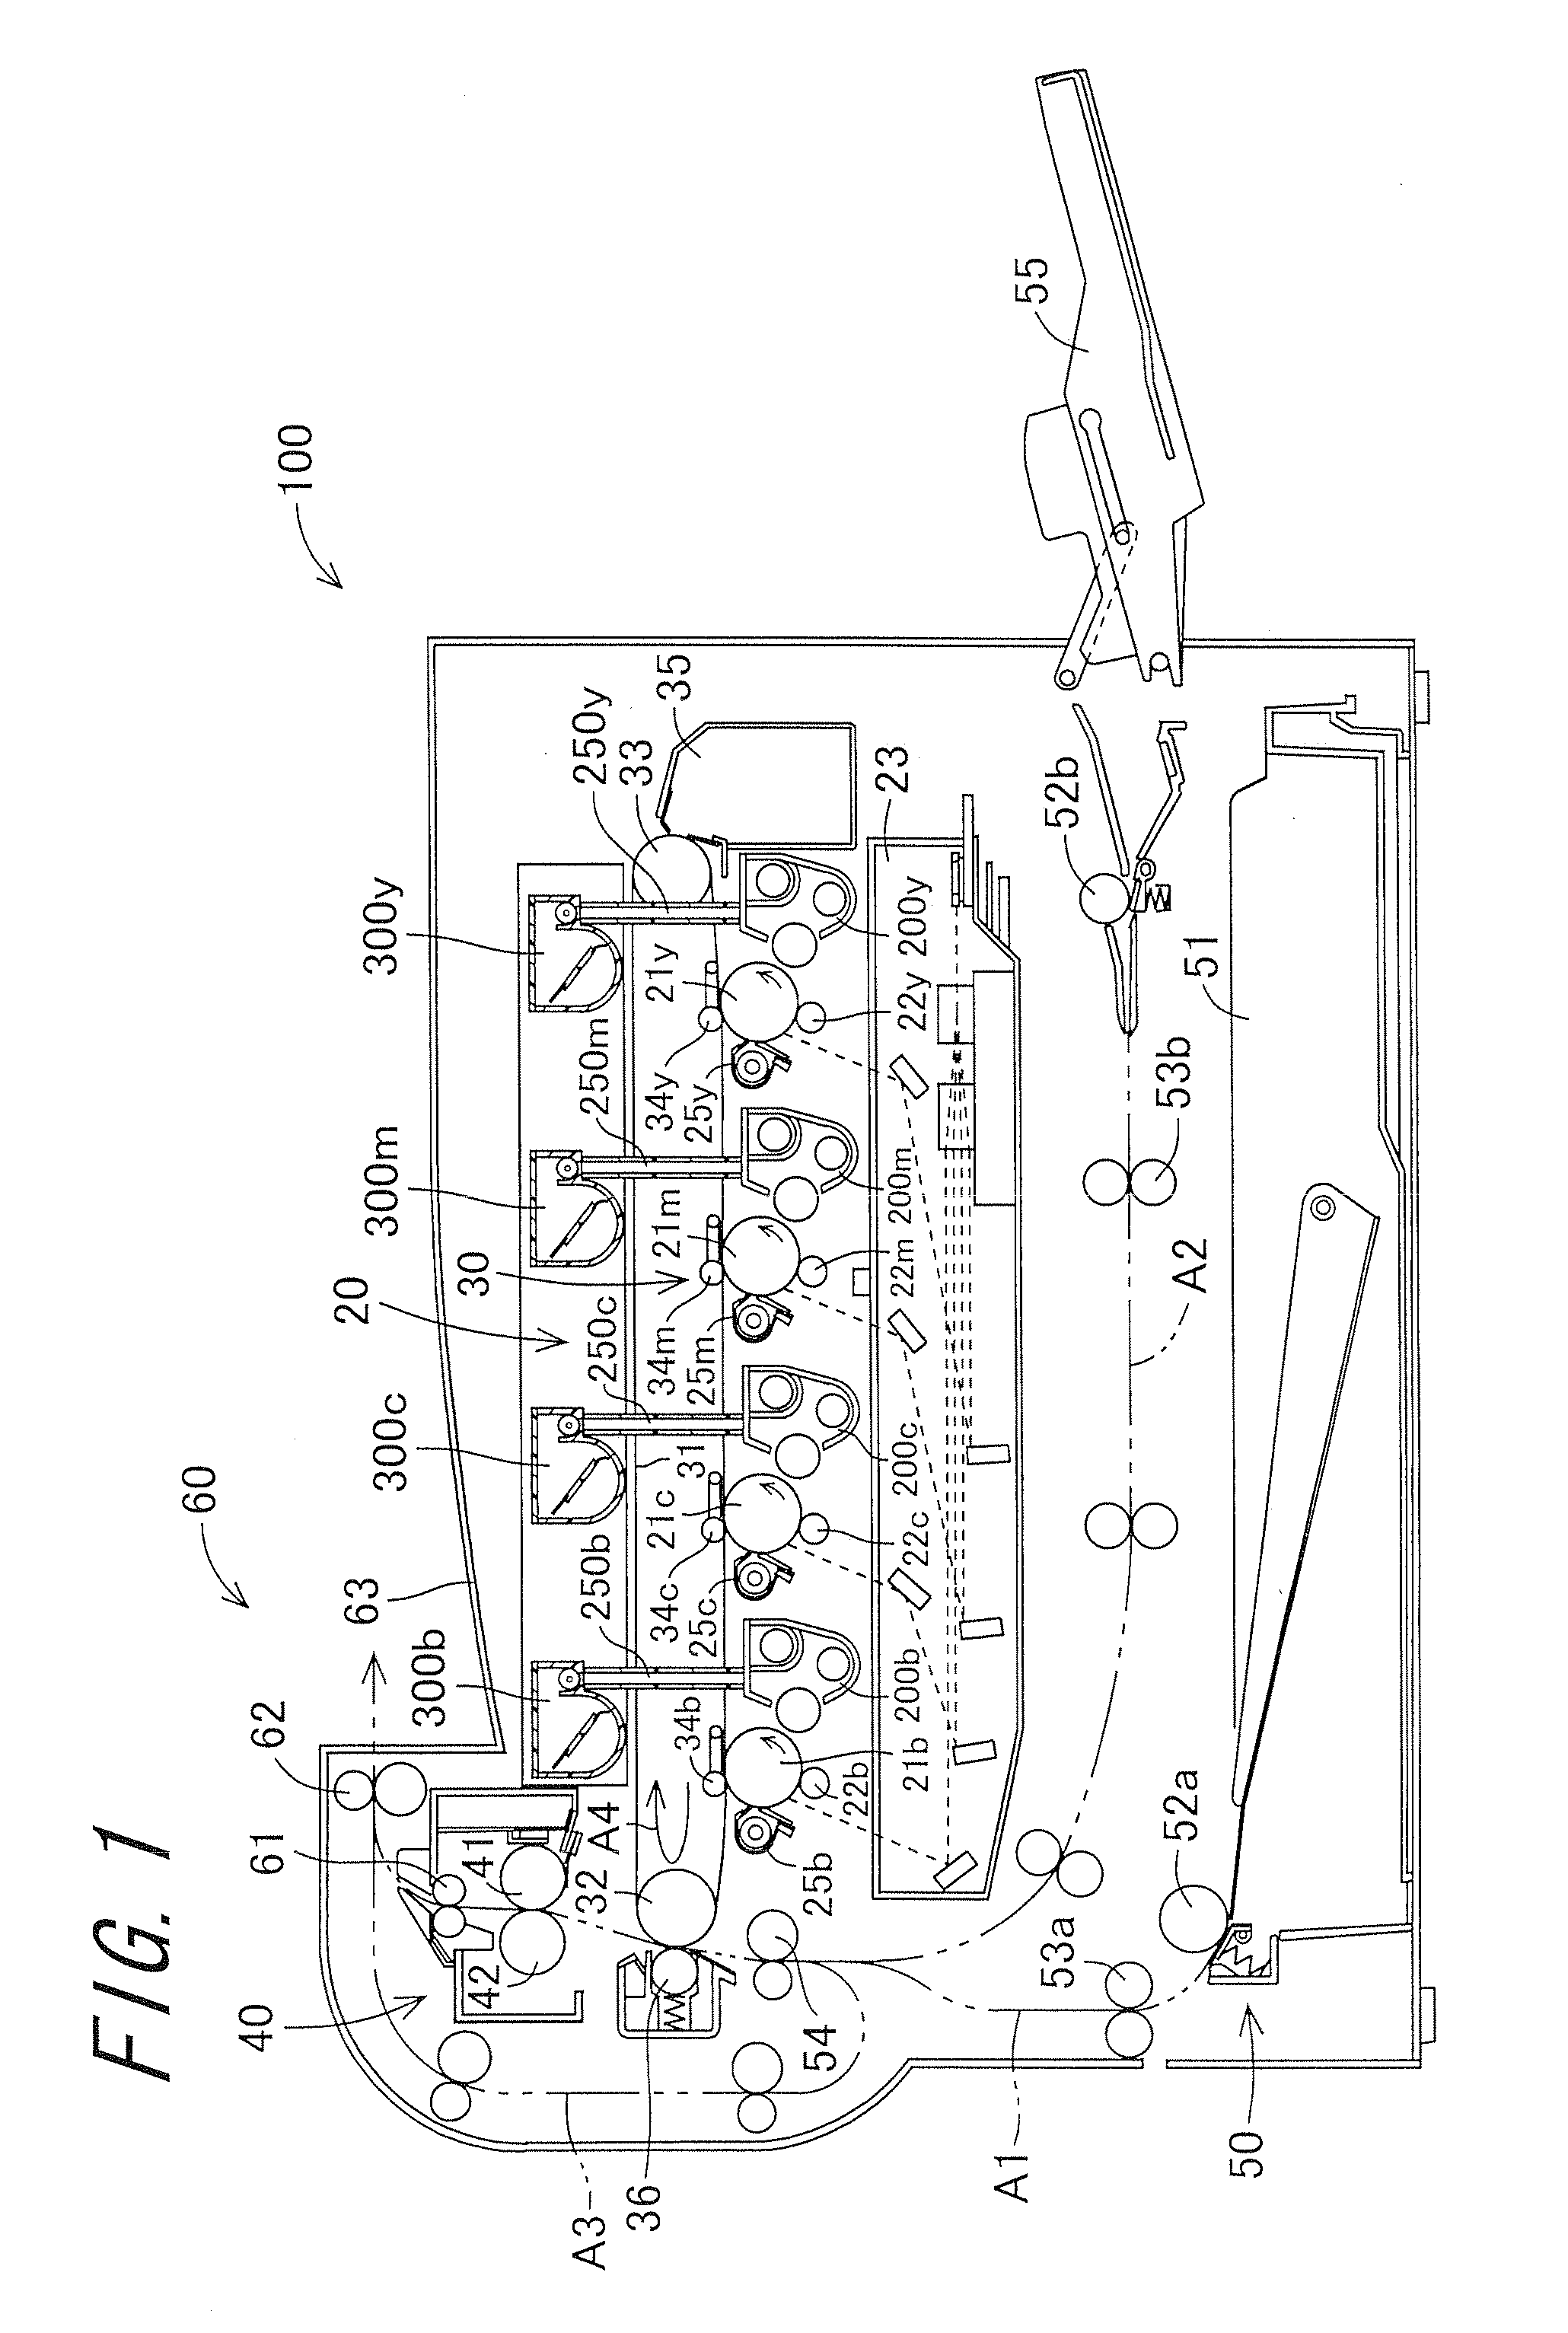 Developing device, image forming apparatus, developer agitating and conveying method